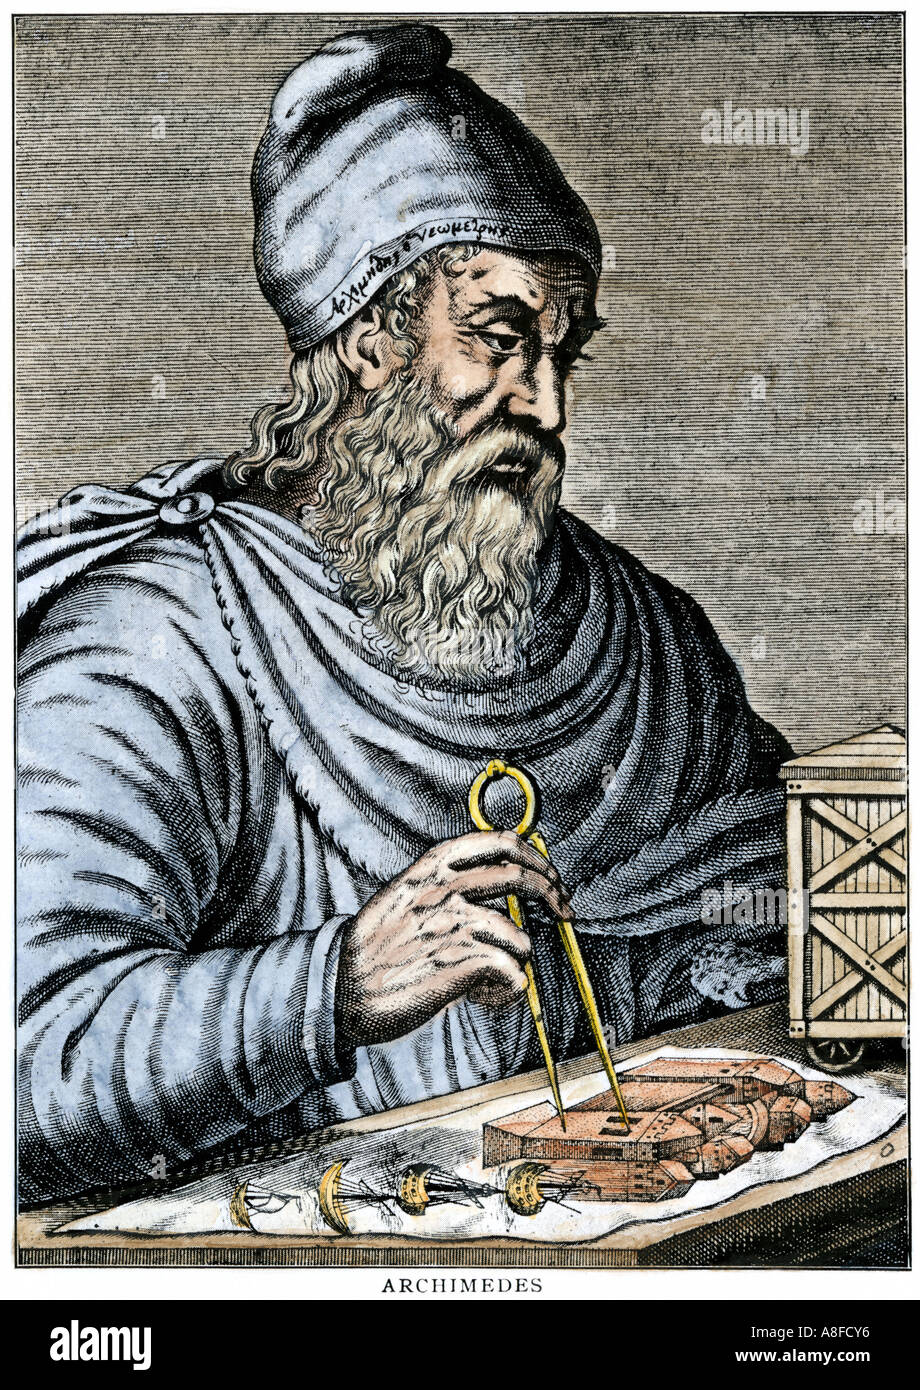 Archimedes using calipers in ancient Greece. Hand-colored woodcut Stock Photo